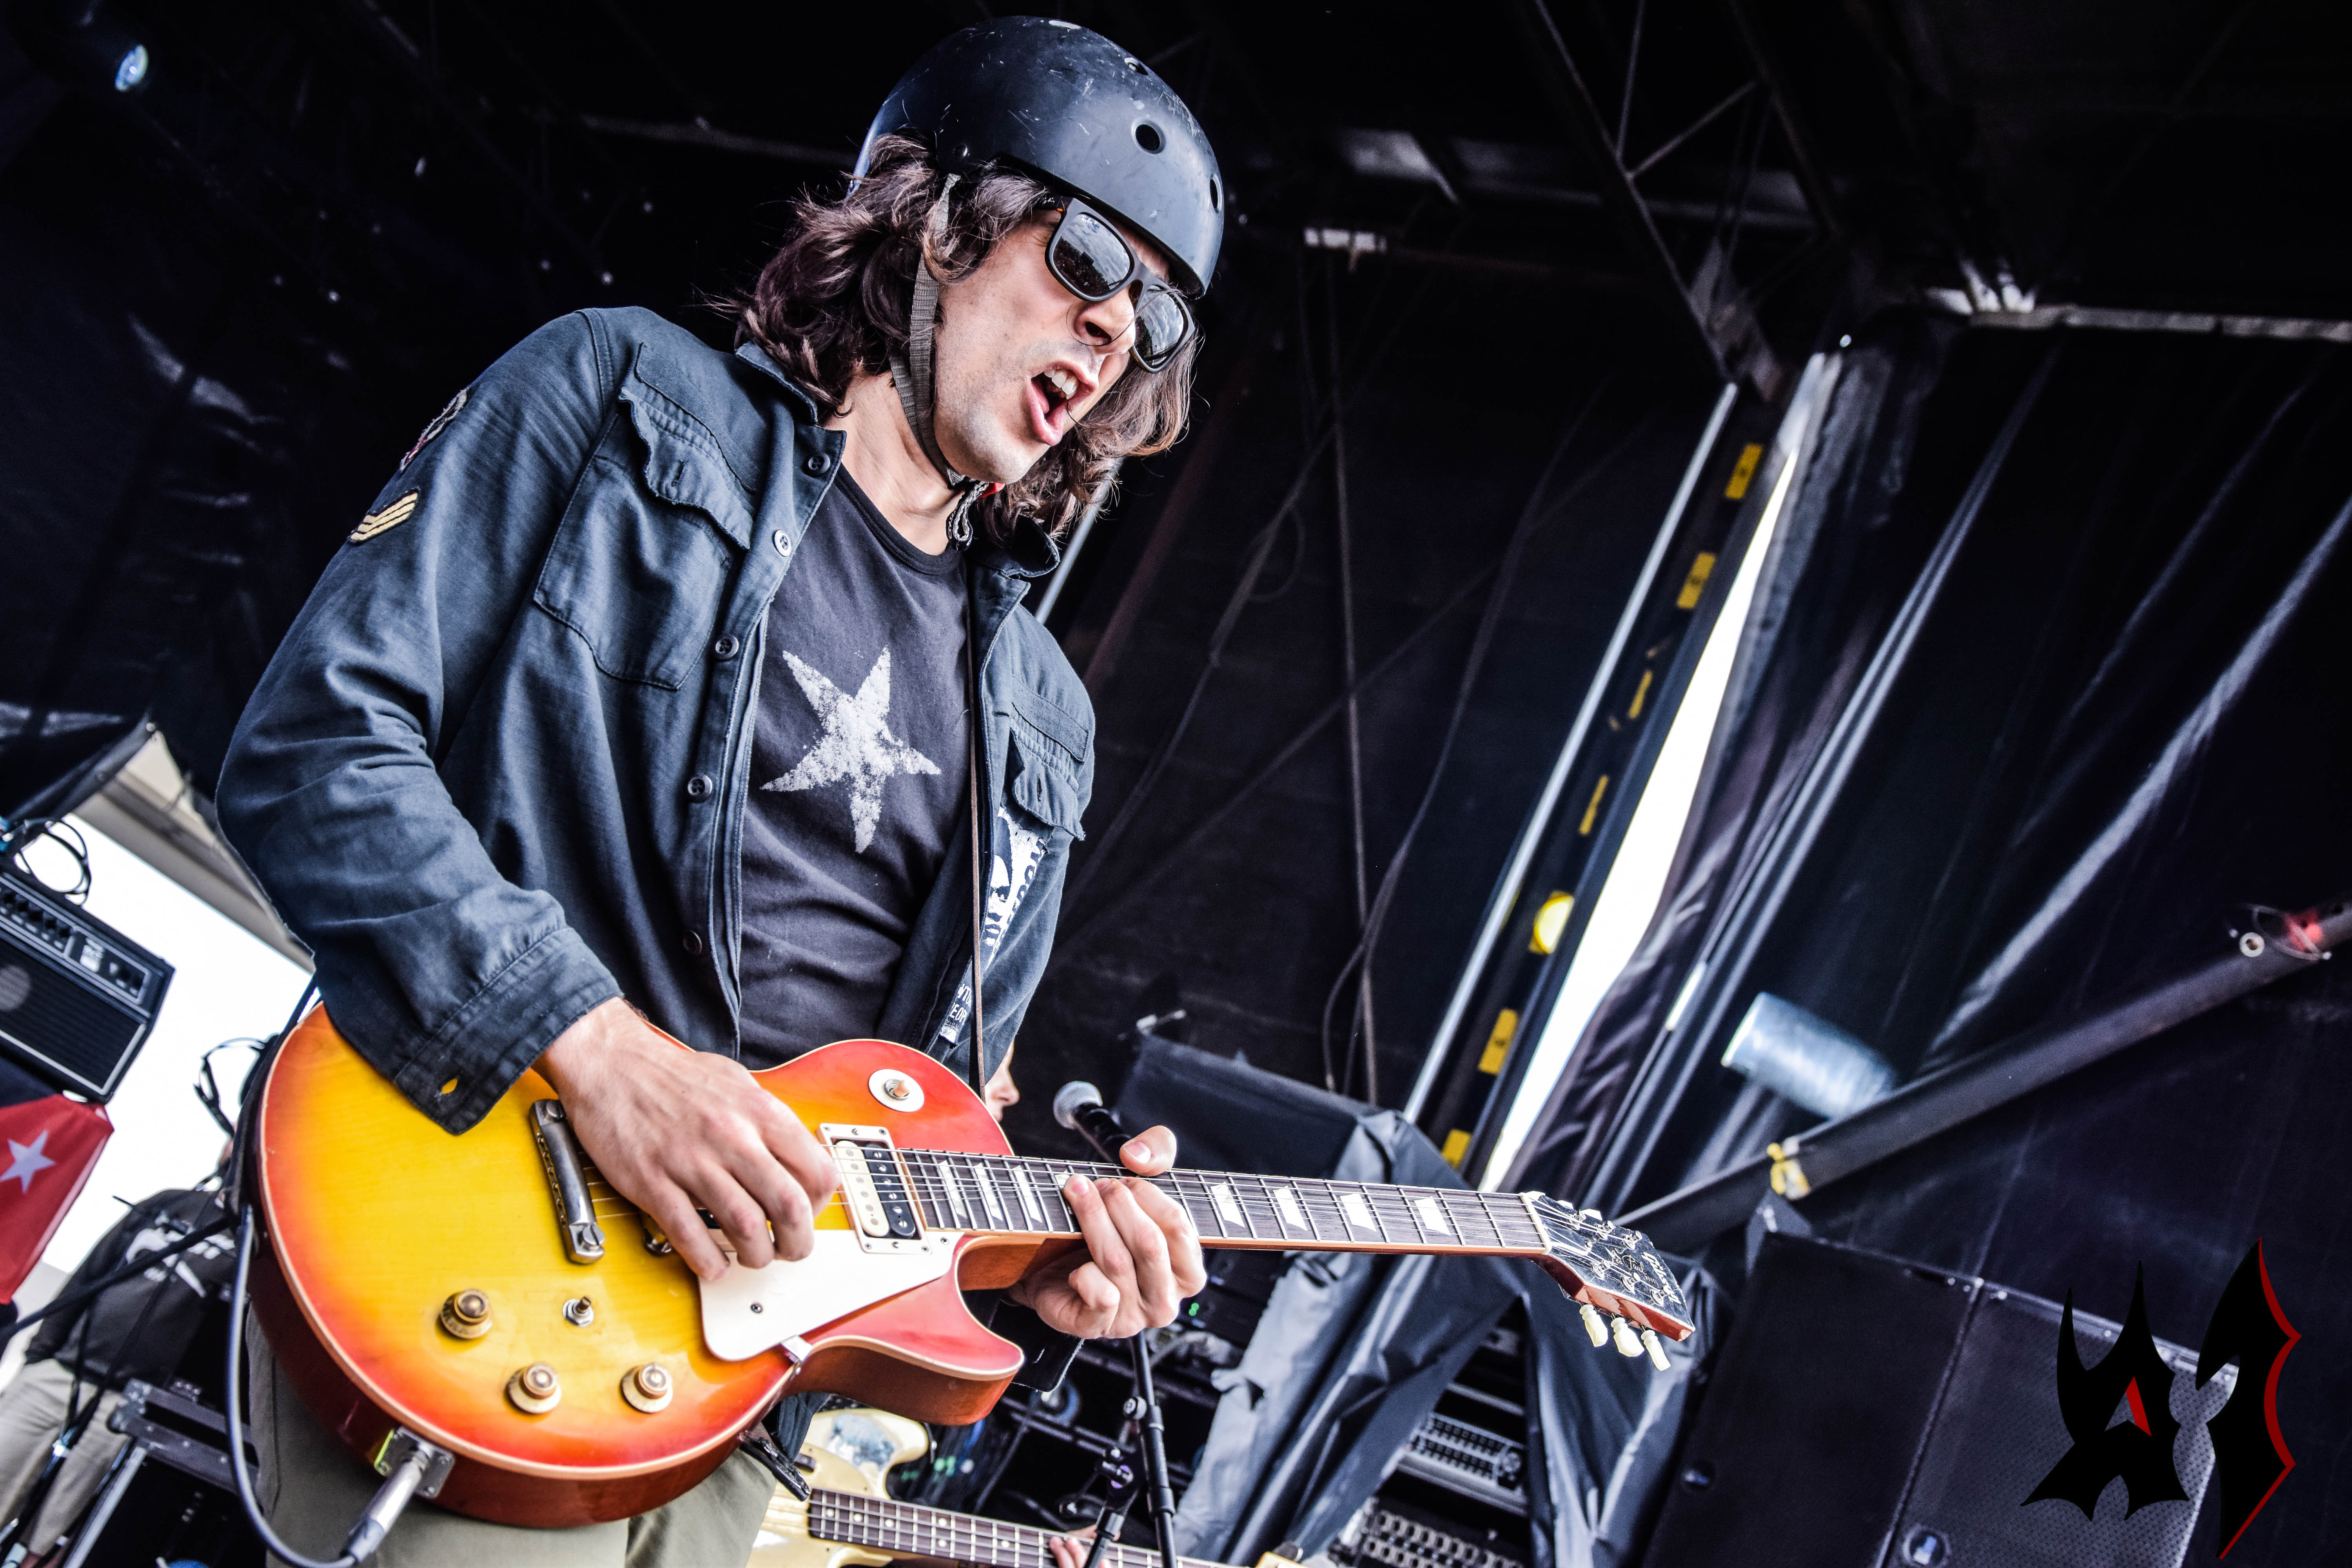 Donwload 2018 – Day 3 - The Last Internationale 11